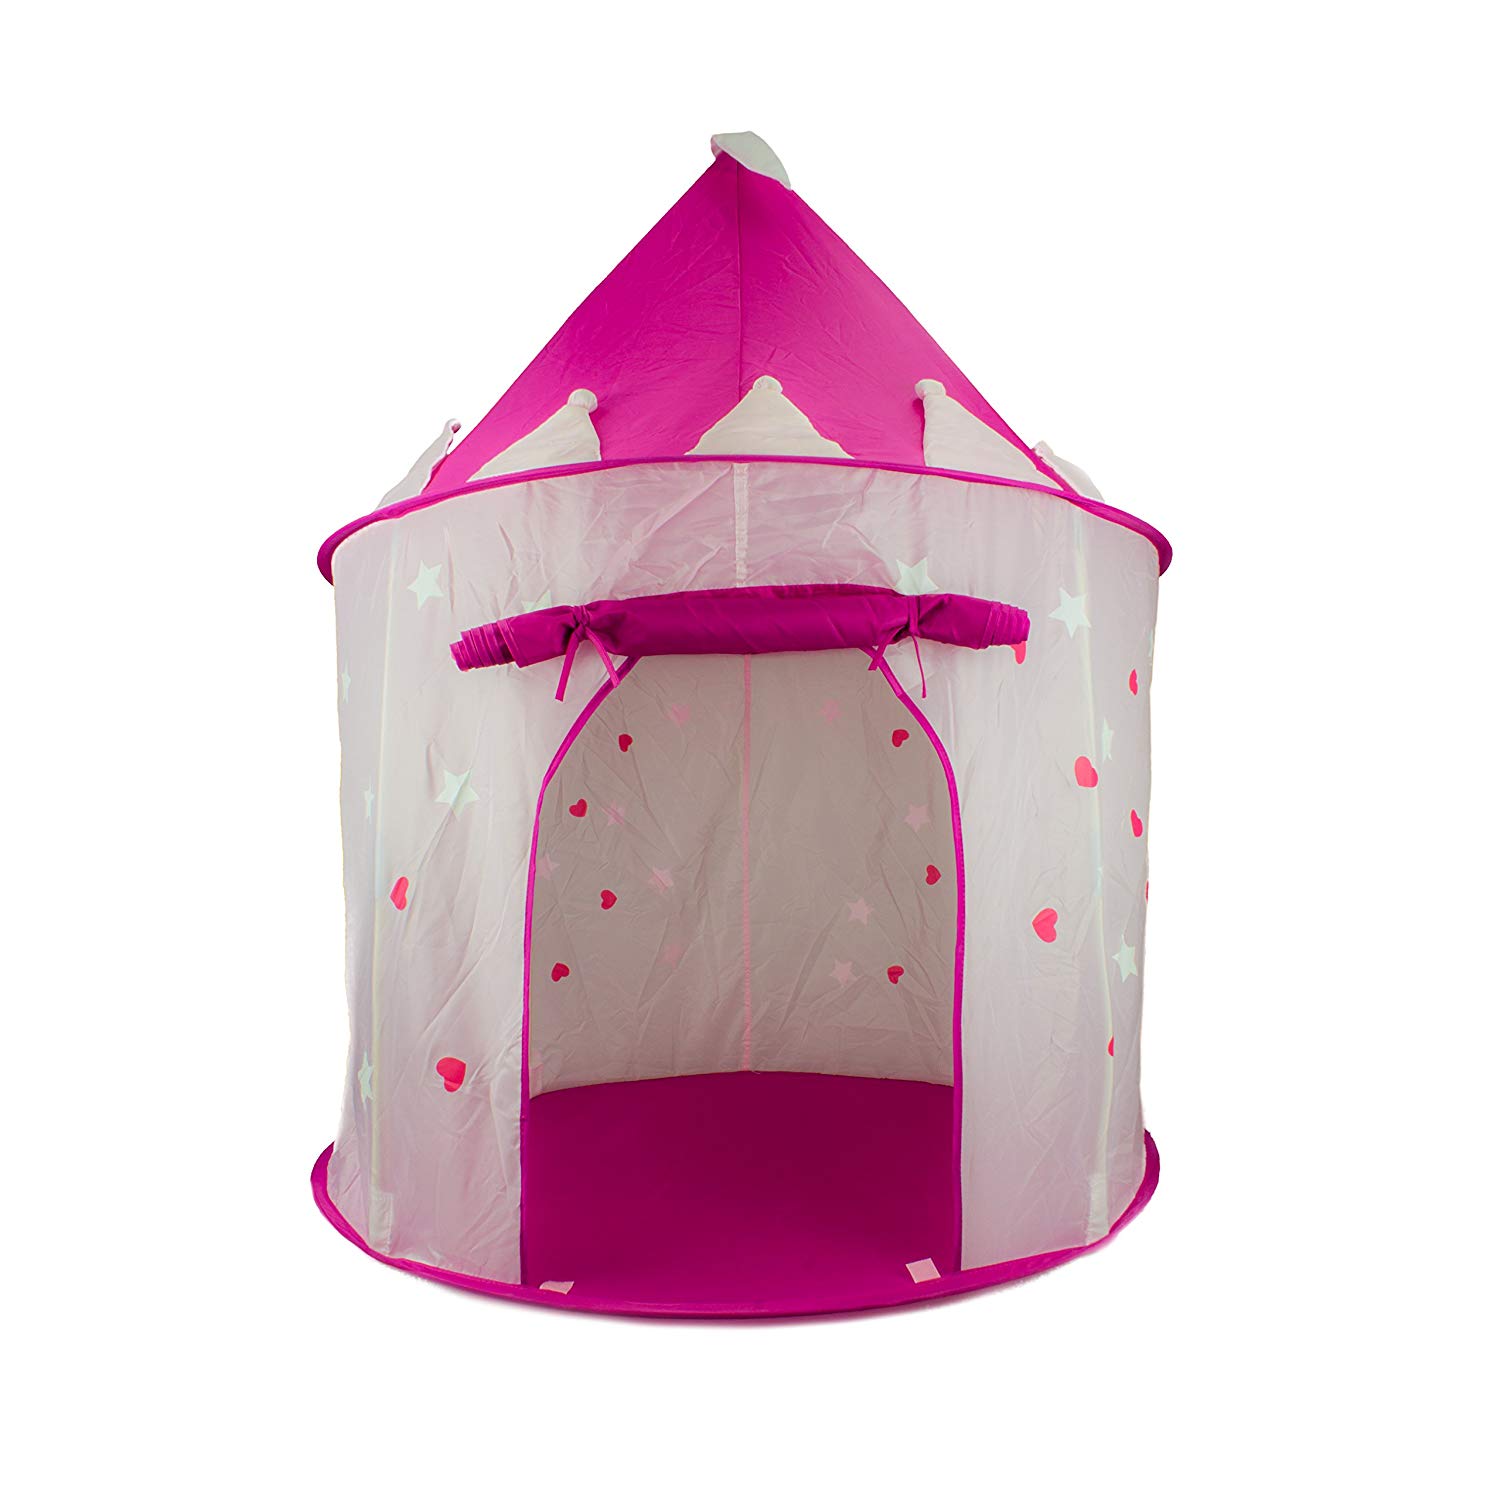 FoxPrint Princess Castle Glow in the Dark Foldable Pop Up Play Tent - image 2 of 5